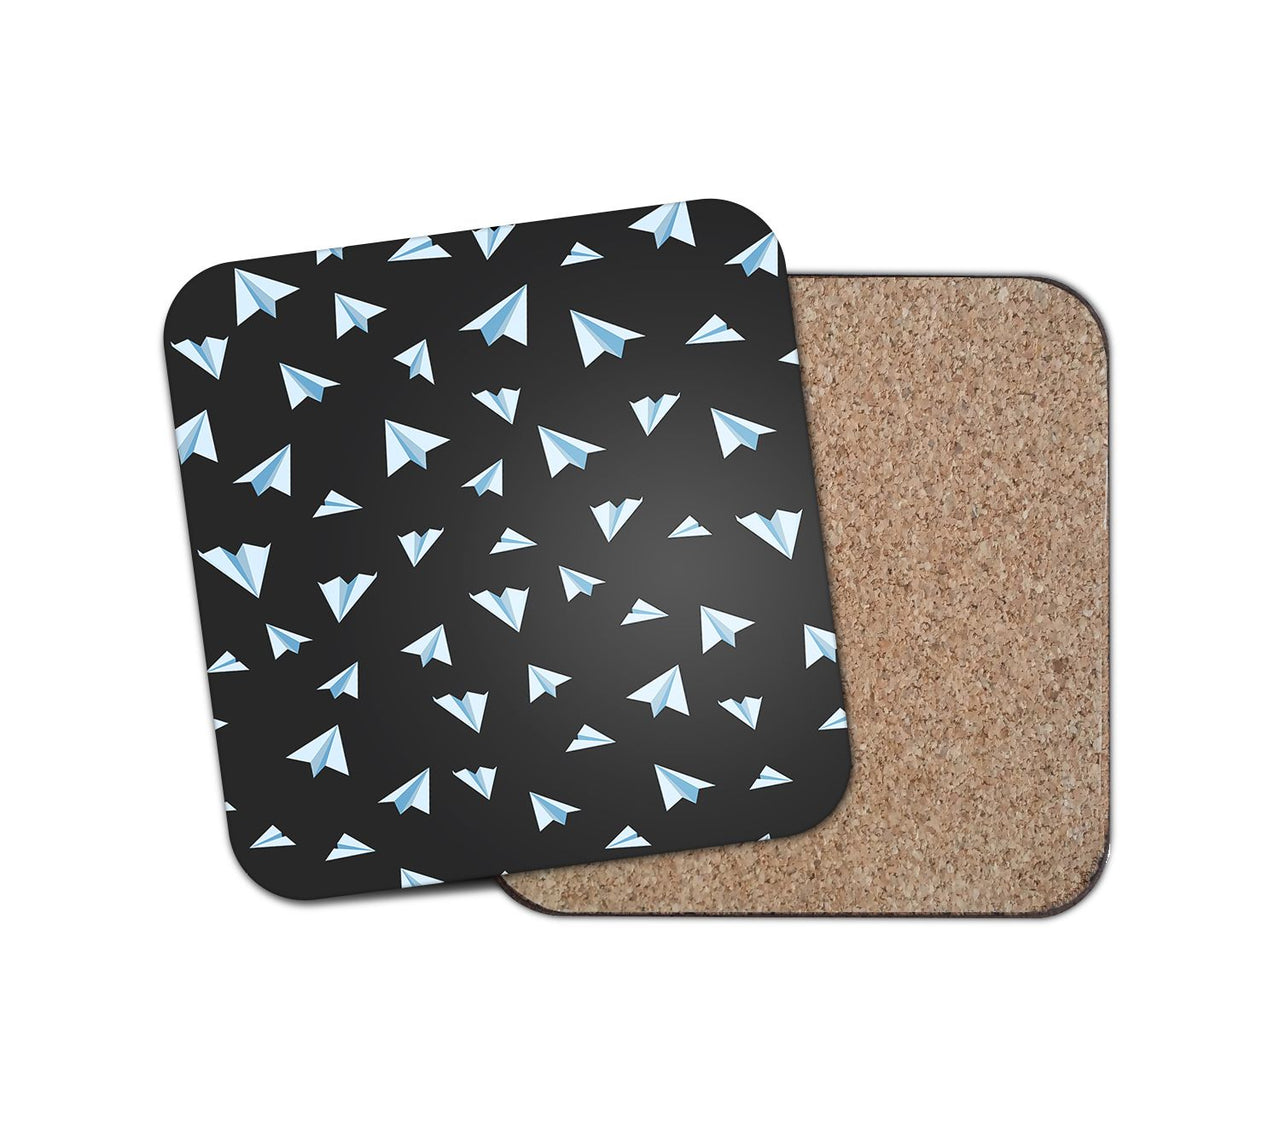 Paper Airplanes (Gray) Designed Coasters